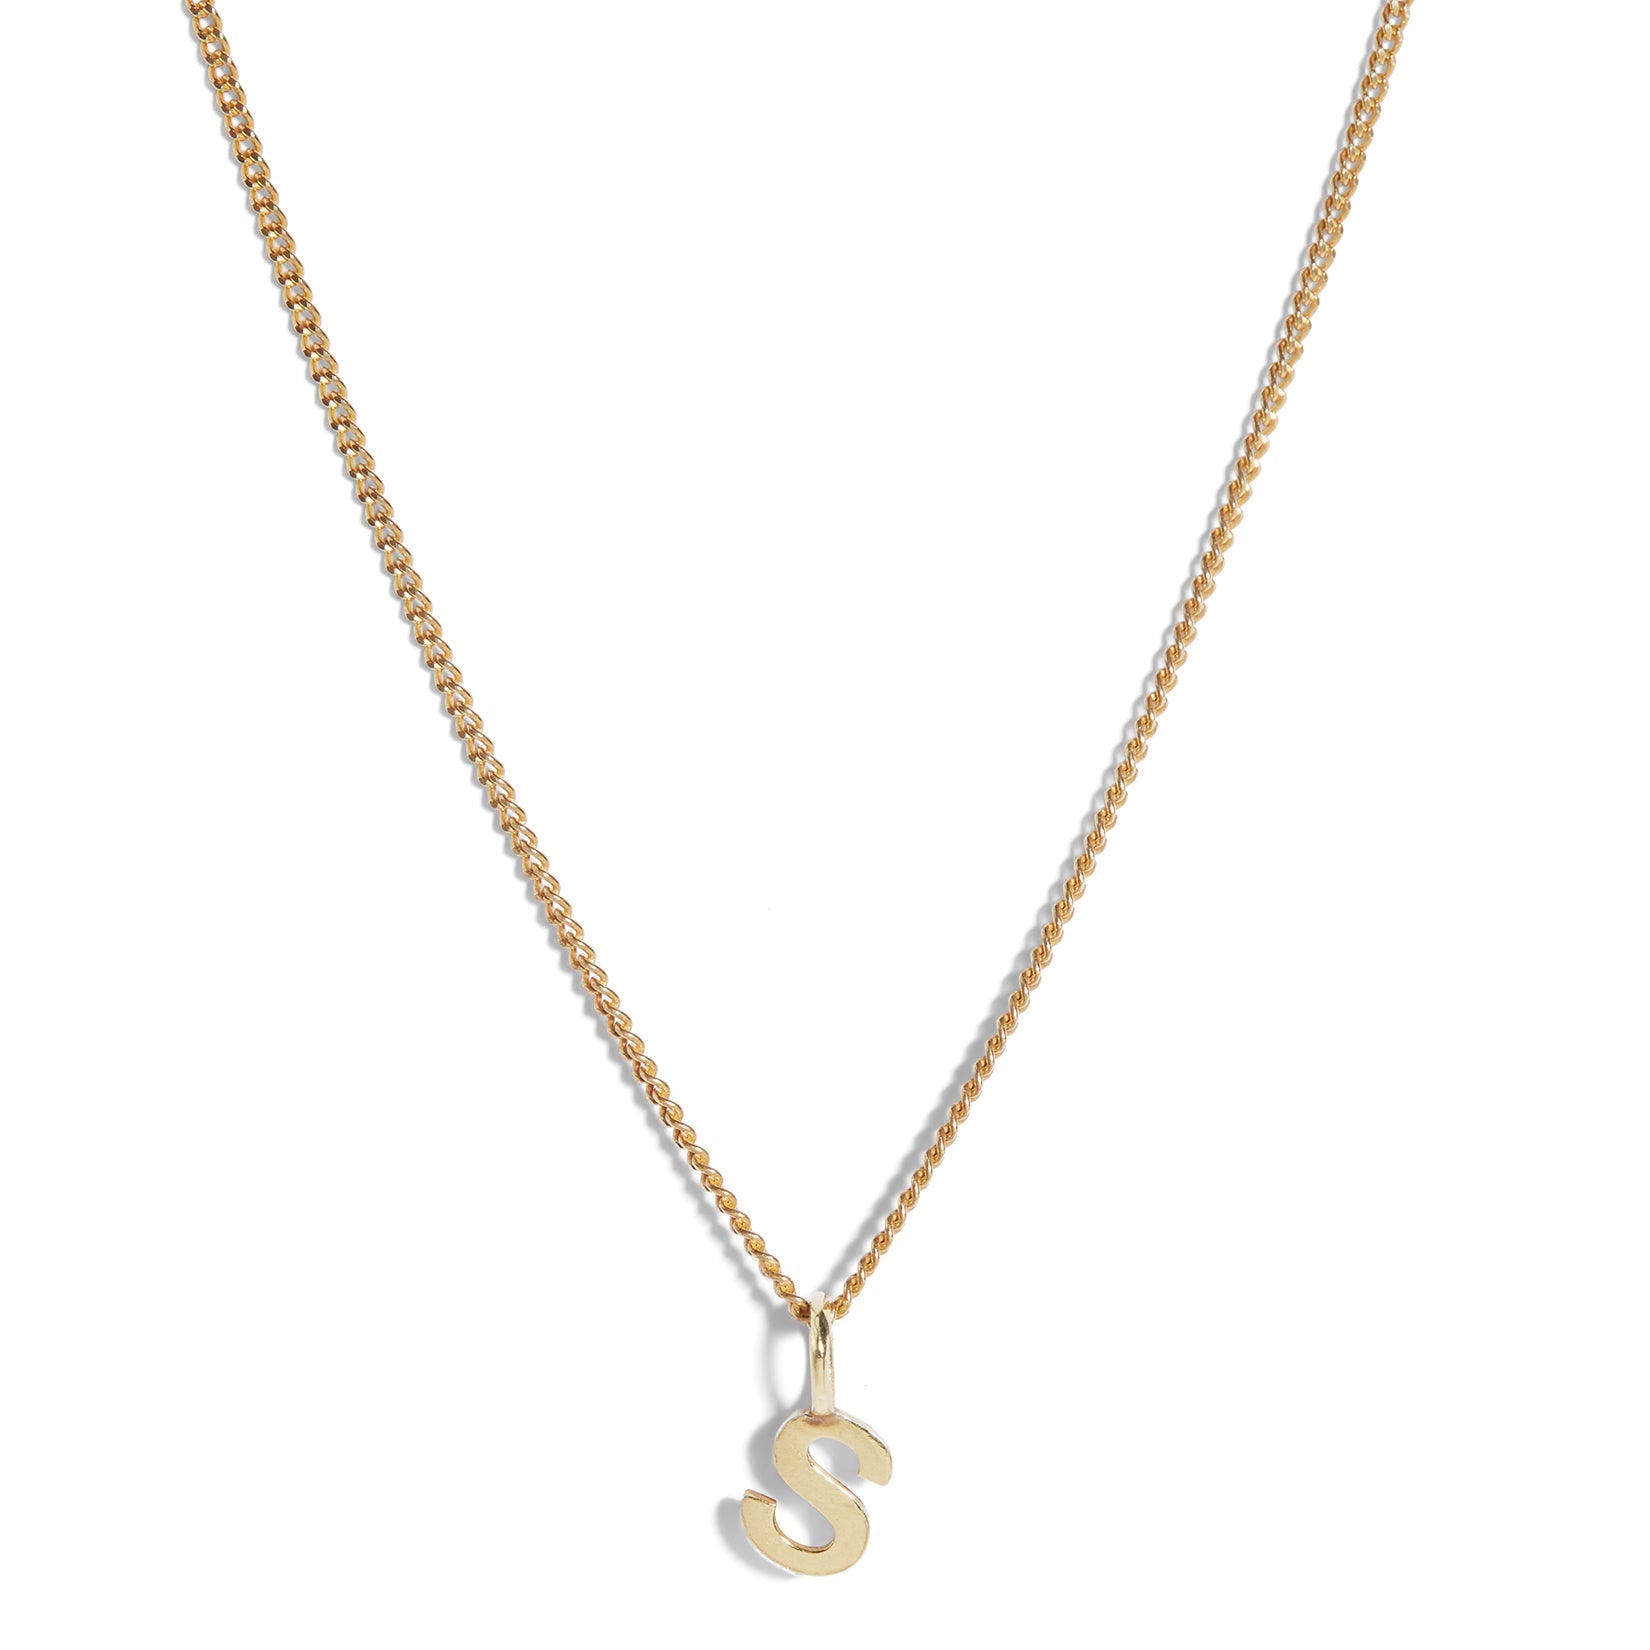 9ct Gold Single Initial Necklace